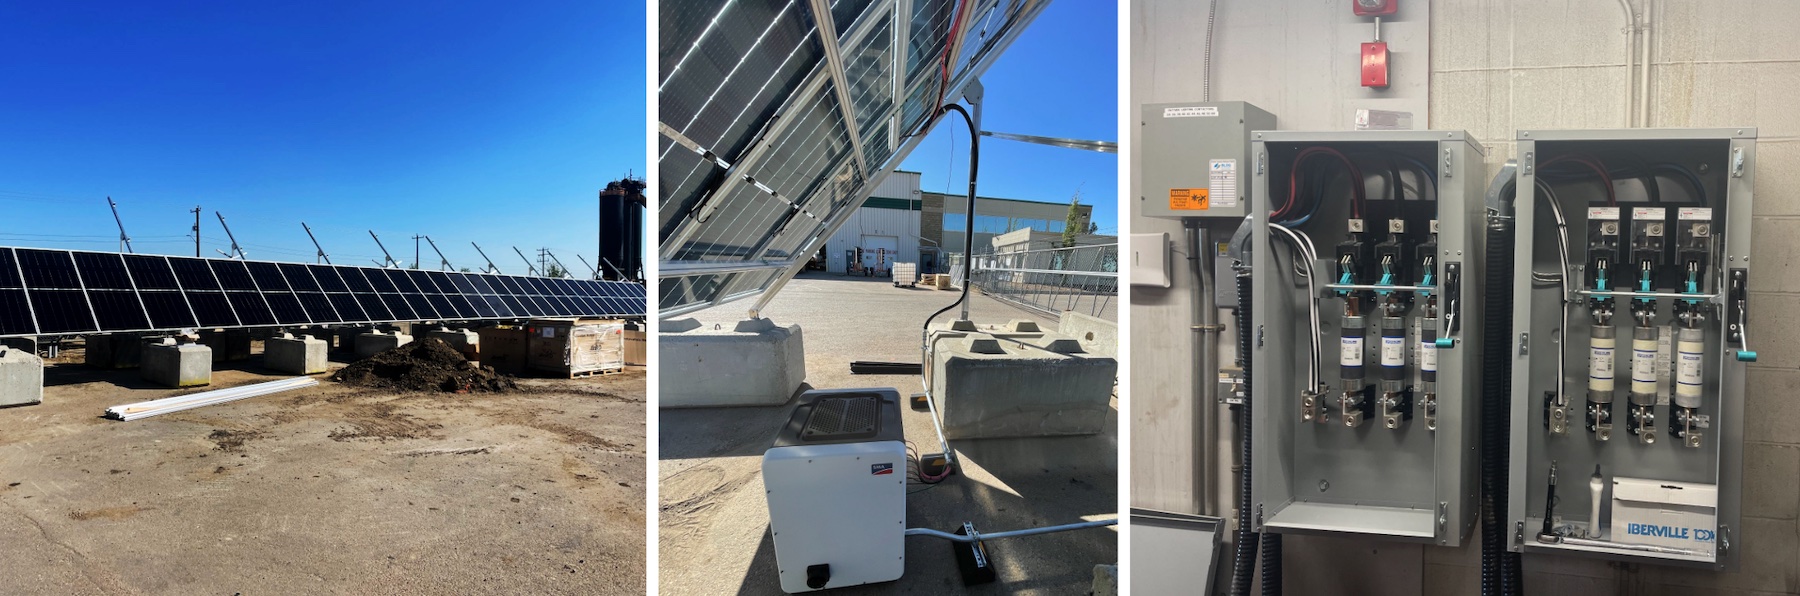 Portable and Scalable Commercial Solar PV System for Carmacks Construction Edmonton Alberta